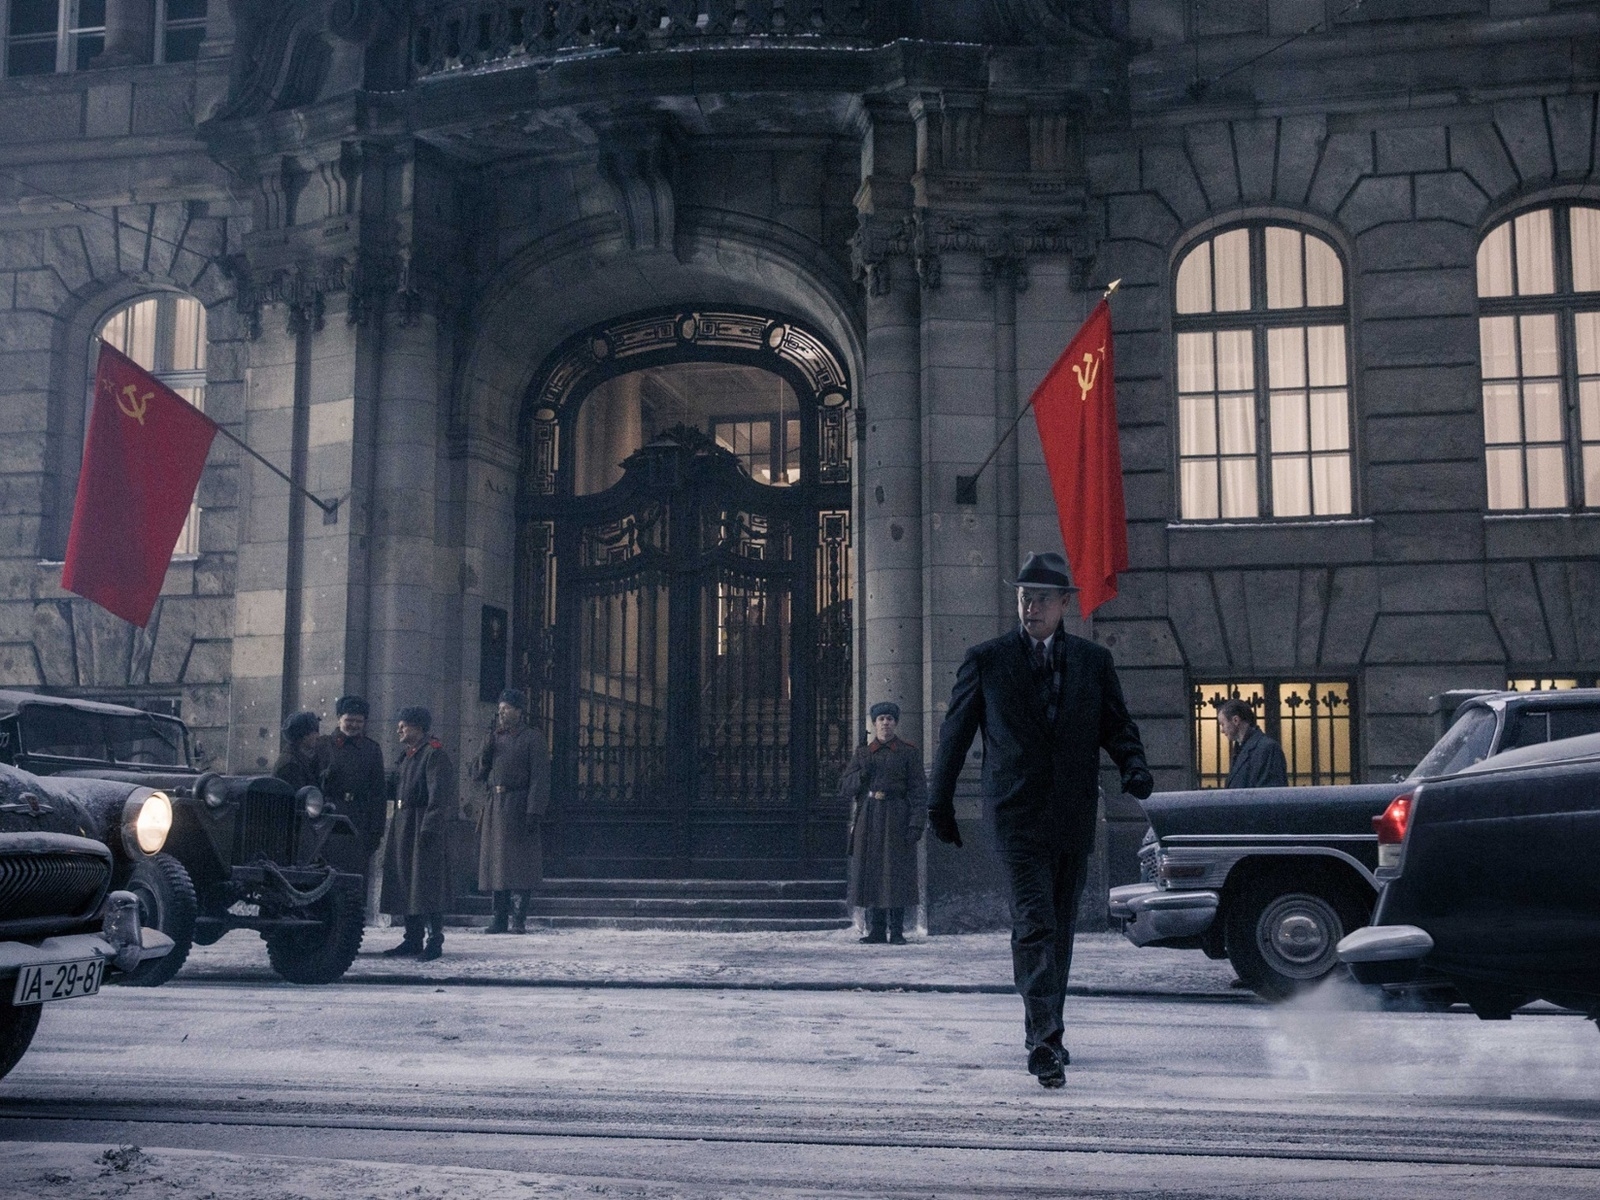 Bridge of Spies for 1600 x 1200 resolution